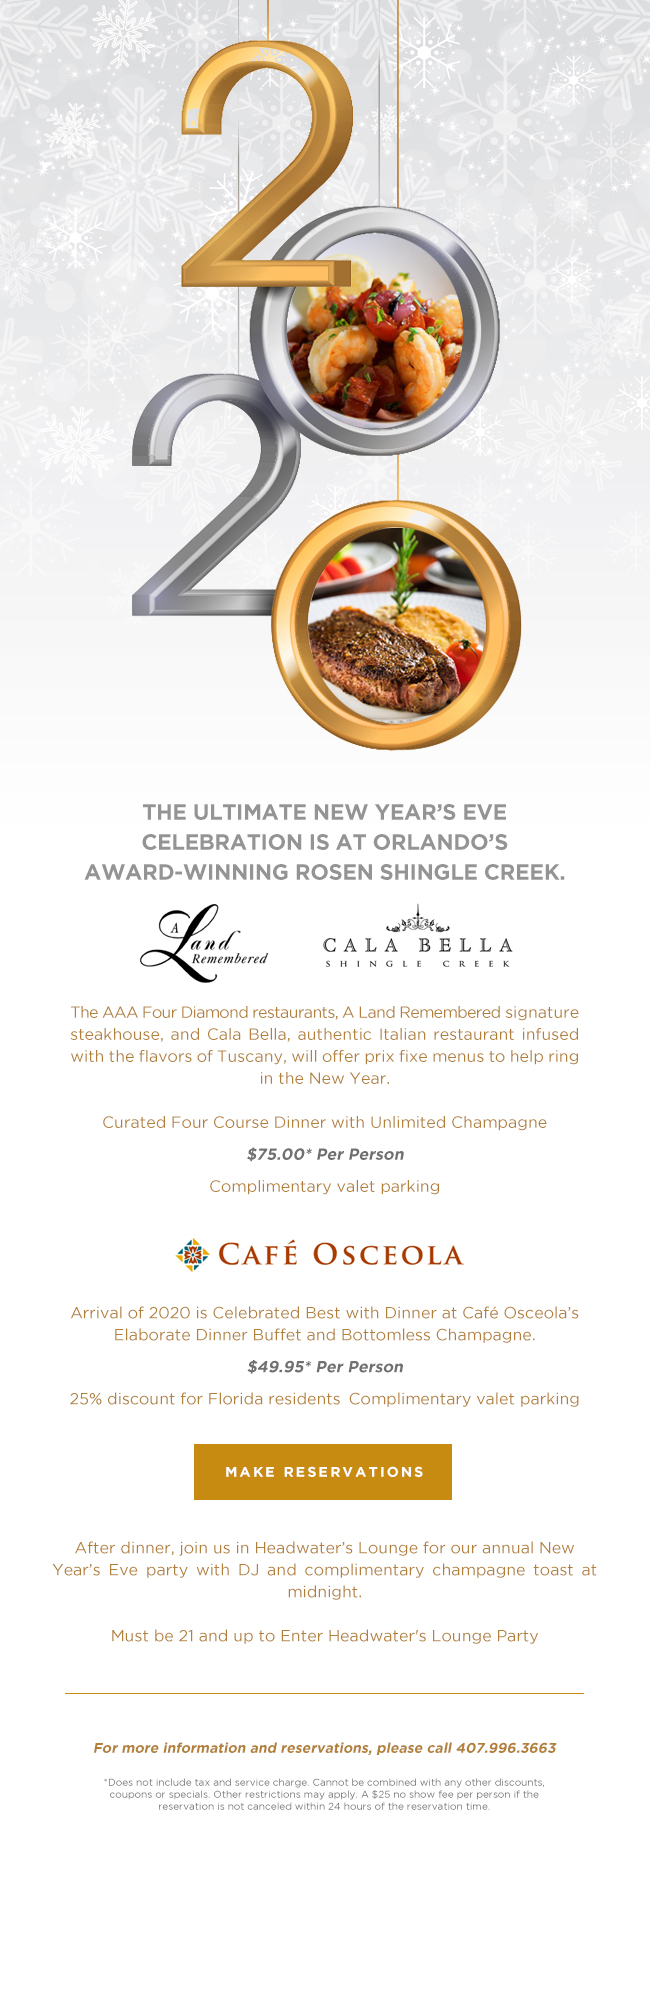 
The AAA Four Diamond restaurants, A Land Remembered signature steakhouse, and Cala Bella, authentic Italian restaurant infused with the flavors of Tuscany, will offer prix fixe menus to help ring in the New Year.

Curated Four Course Dinner with Unlimited Champagne
$75.00* Per Person
Complimentary valet parking
		  
---
		  
Arrival of 2020 is Celebrated Best with Dinner at Café Osceola’s Elaborate Dinner Buffet and Bottomless Champagne.
$49.95* Per Person
25% discount for Florida residents | Complimentary valet parking
		  
---
		  
After dinner, join us in Headwater’s Lounge for our annual New Year’s Eve party with DJ and complimentary champagne toast at midnight.

Must be 21 and up to Enter Headwater's Lounge Party
		  
For more information and reservations, please call 407.996.3663
		  
*Does not include tax and service charge. Cannot be combined with any other discounts, coupons or specials. Other restrictions may apply. A $25 no show fee per person if the reservation is not canceled within 24 hours of the reservation time.